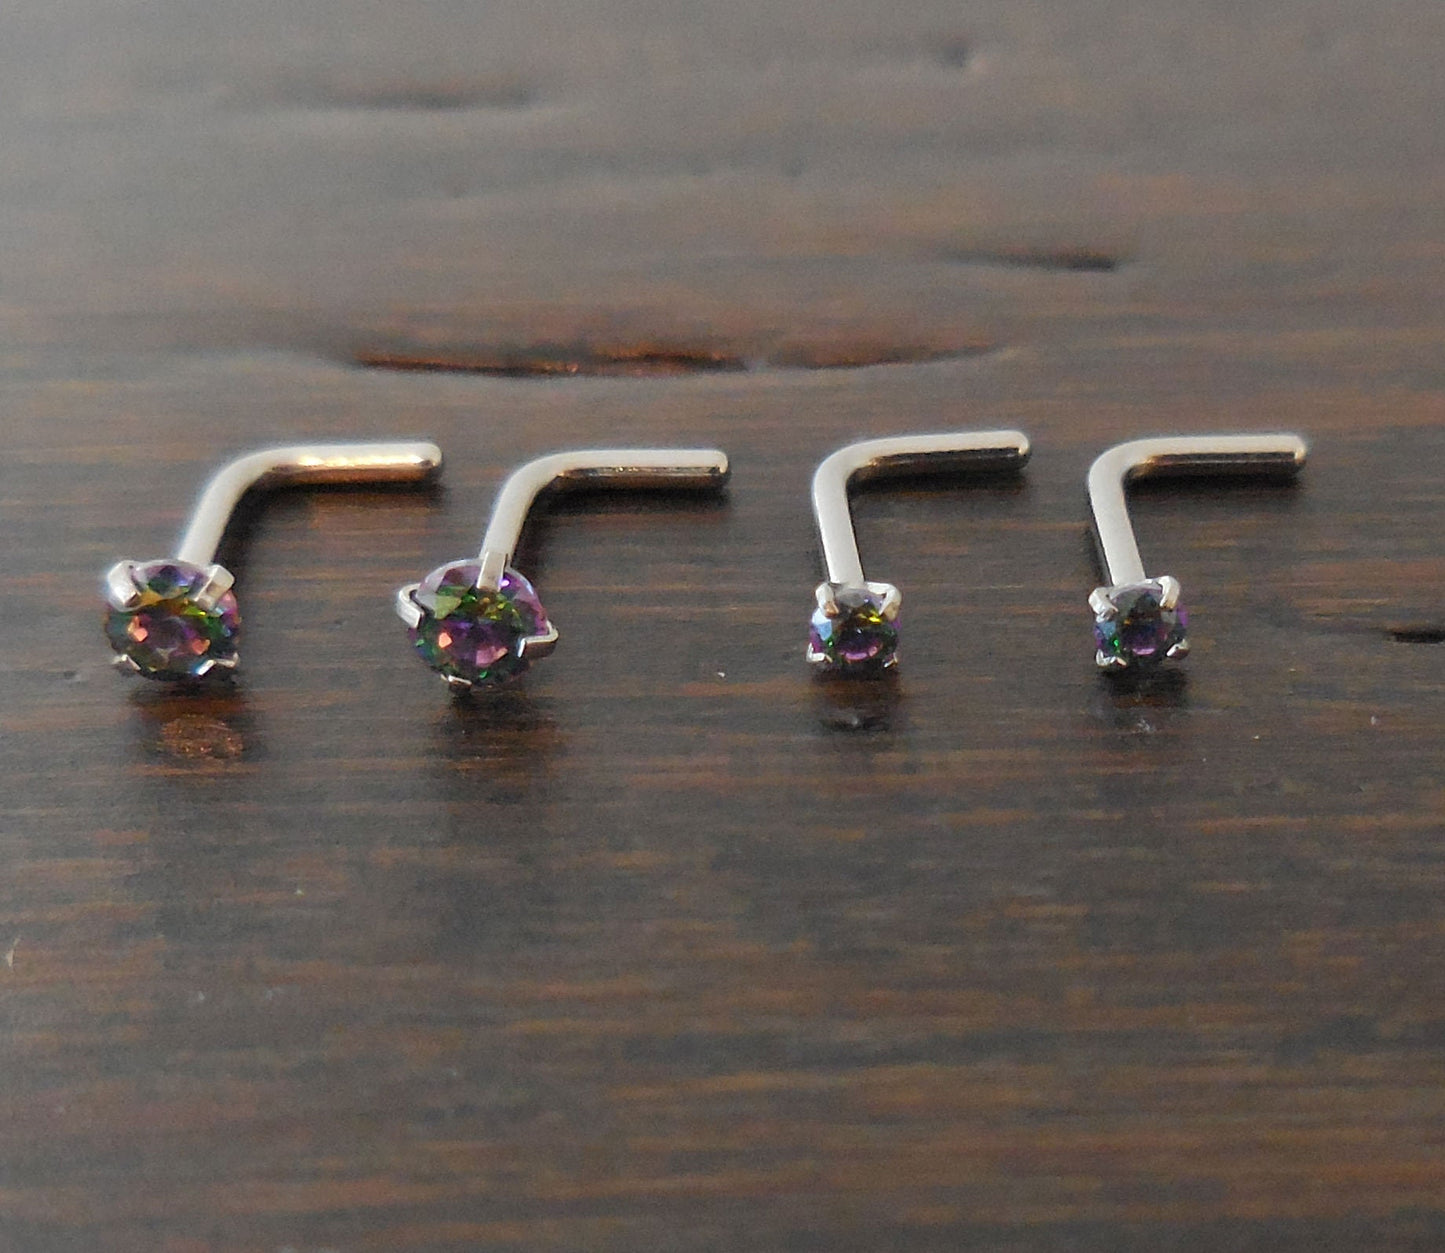 Pair 2mm or 3mm Prong Set Screws Nose Rings Many Colors Stainless Steel Blue Red Pink AB Crystal L Shape 20G or 18G